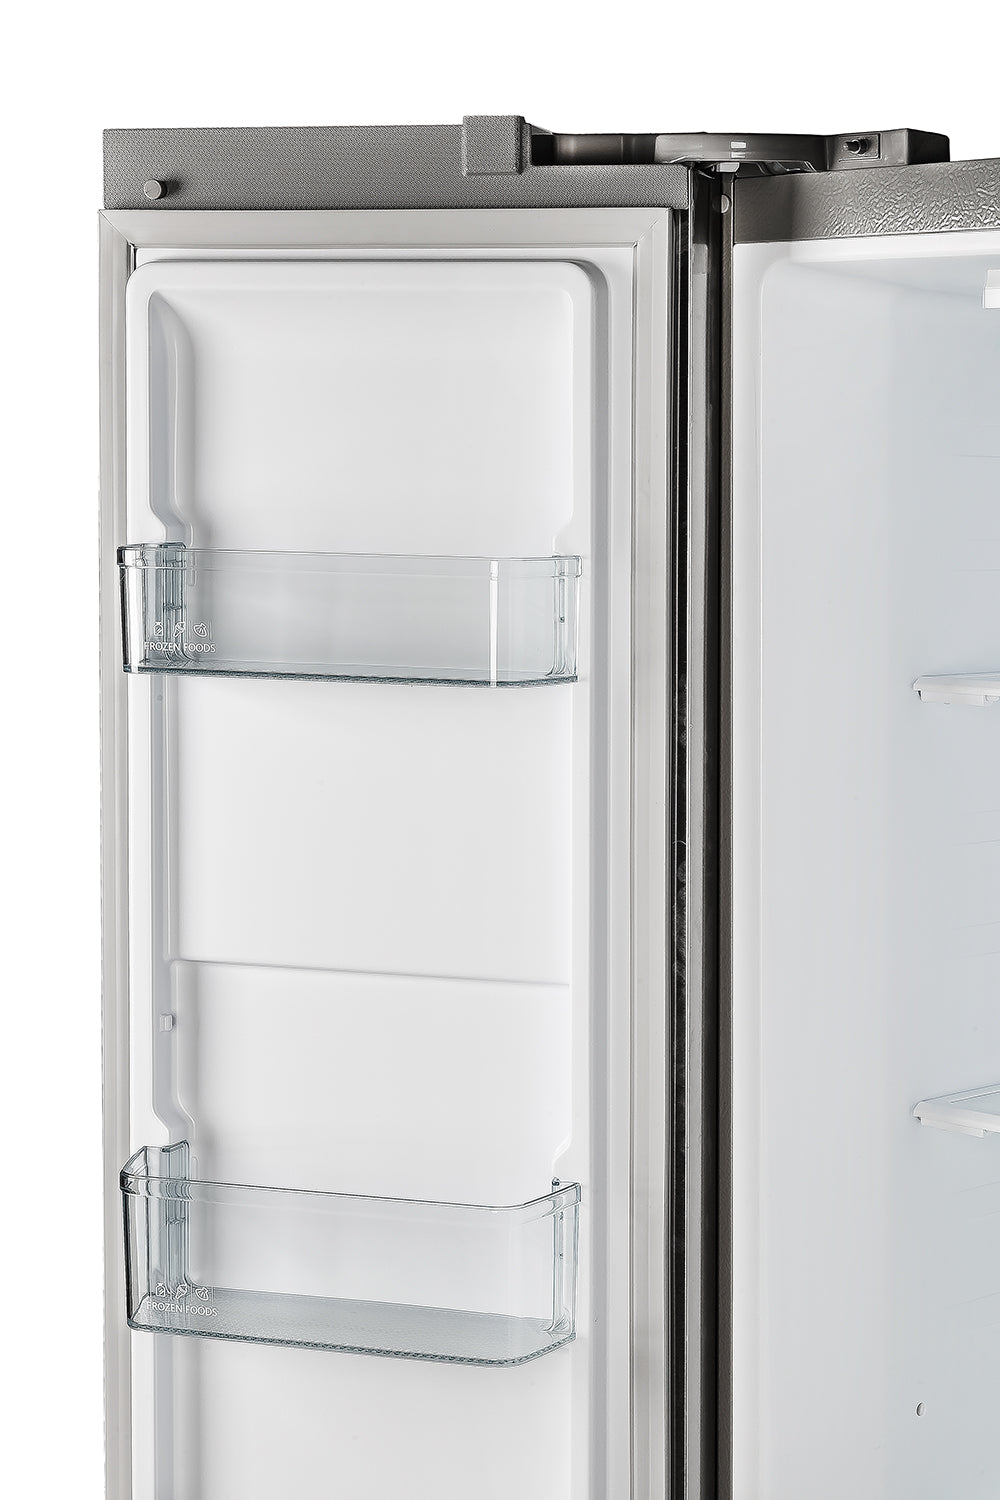 Forno Salerno - 33 in. 15.6 cu. ft. Side by Side Counter Depth Refrigerator in Stainless Steel (FFRBI1805-33SB)